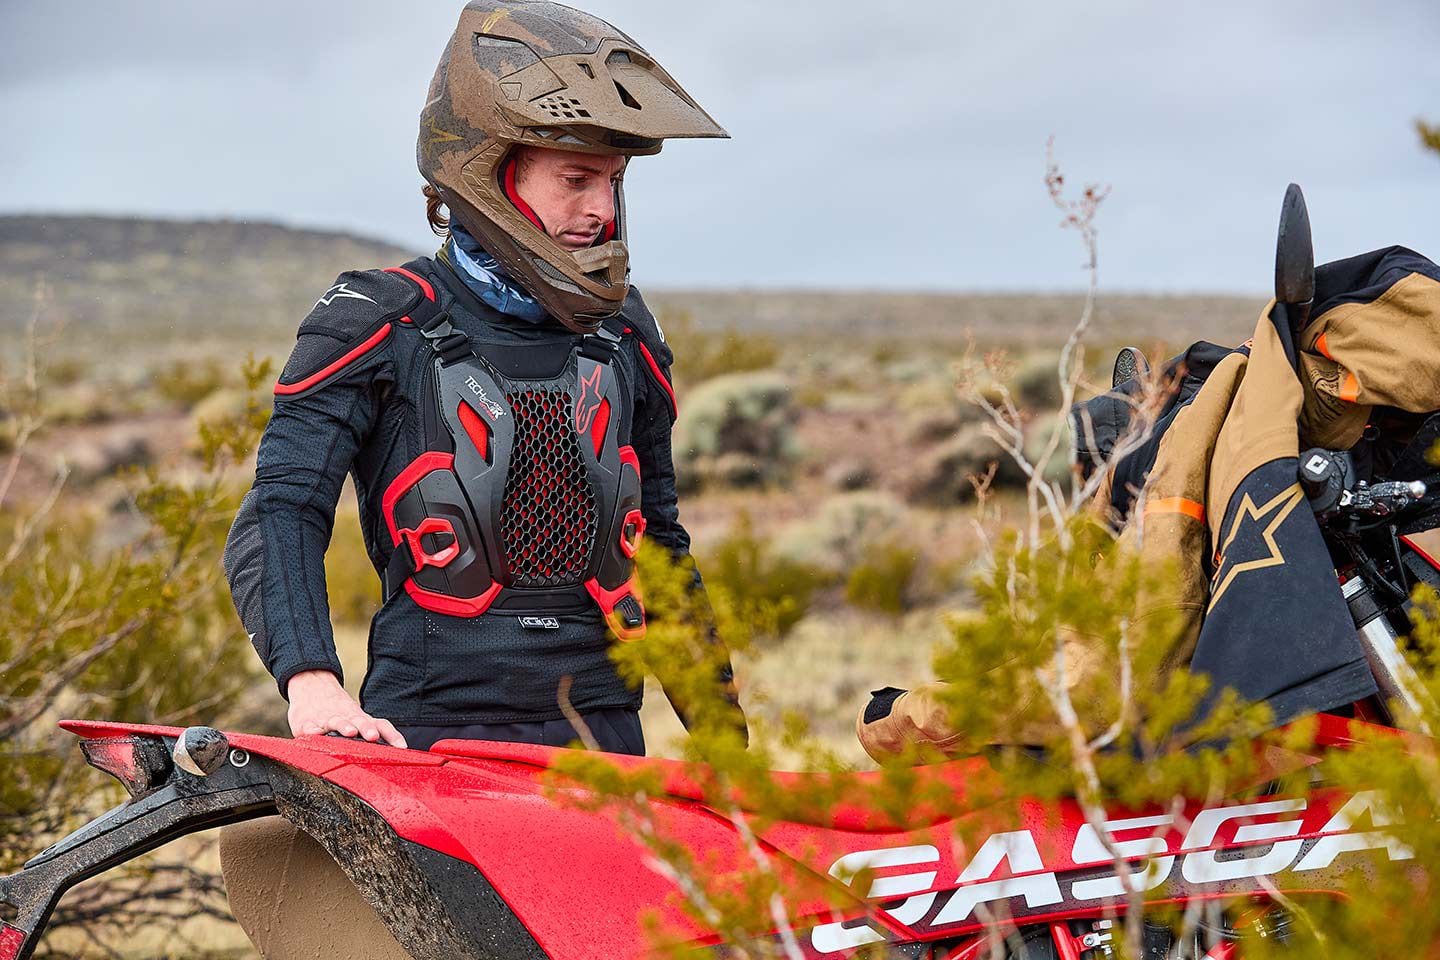 Alpinestars’ Tech-Air Off-Road connects to the Tech-Air app via Bluetooth for system updates, status checks, and records rides through an enhanced Google map.